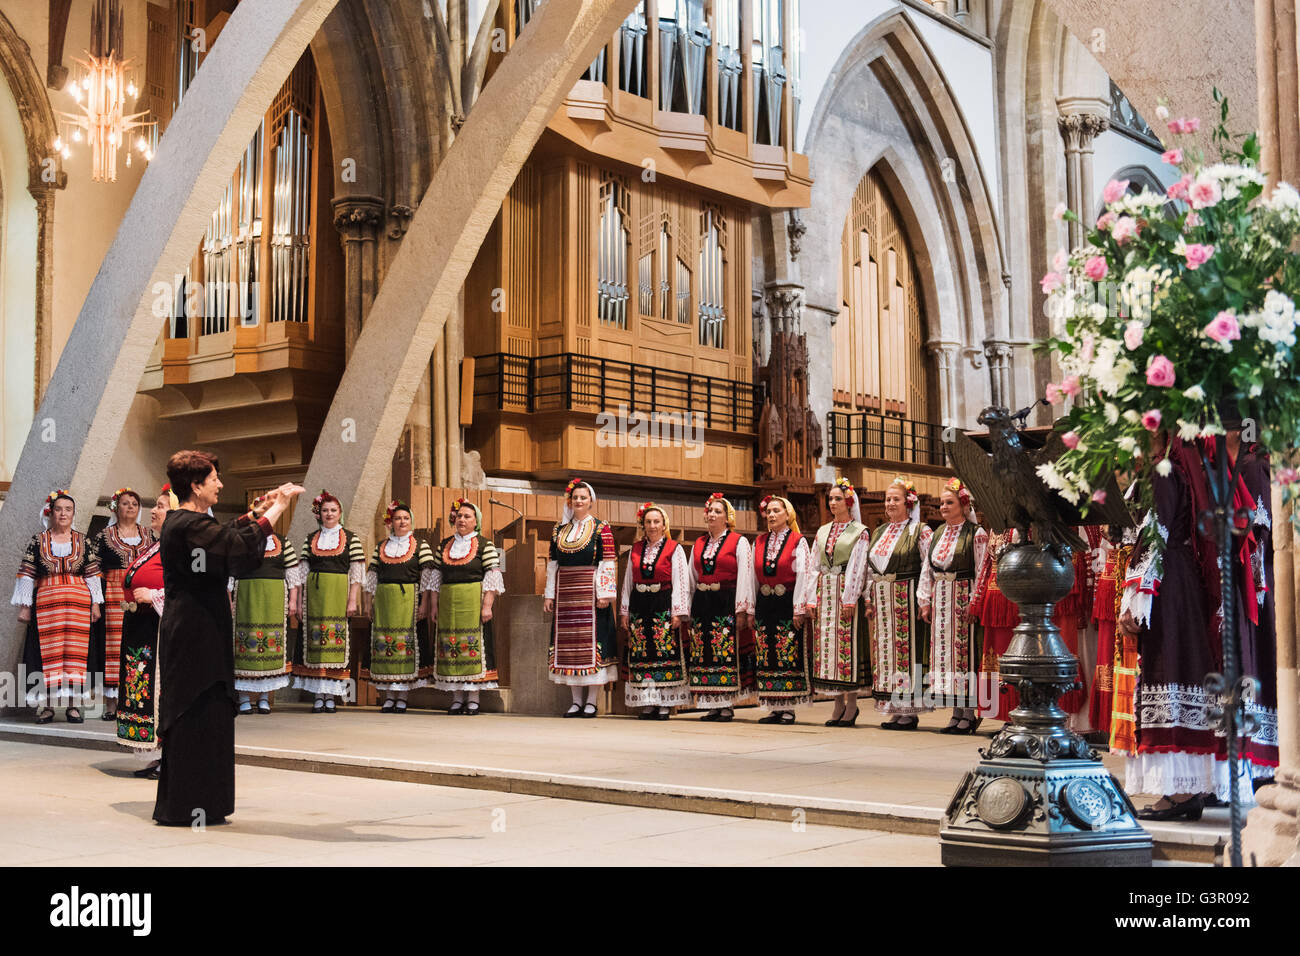 10th June 2016. Festival Of Voice - Bulgarian folk choir 'Le Mystere des Voix Bulgares' perform at Llandaff Cathedral, Cardiff. Stock Photo